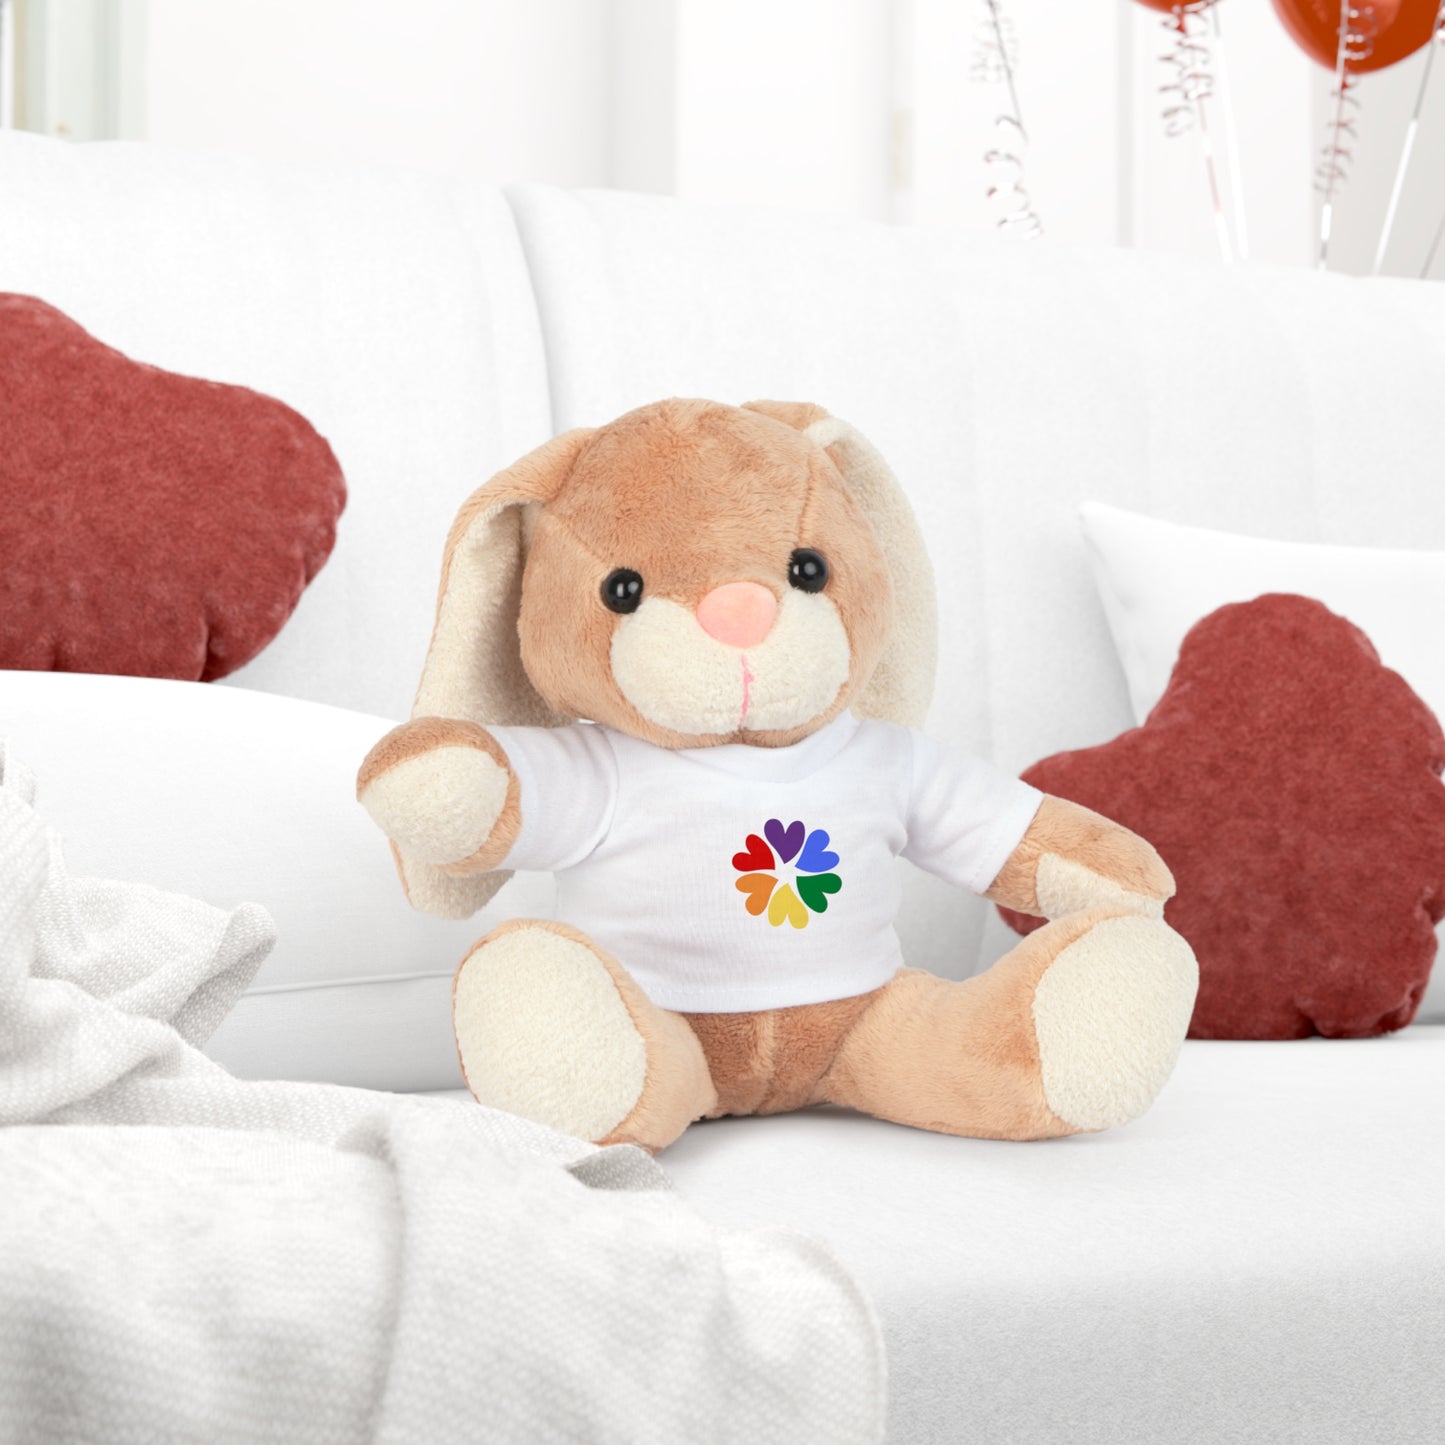 Stuffed Animal - Plush Toy with Heart Flower T-Shirt